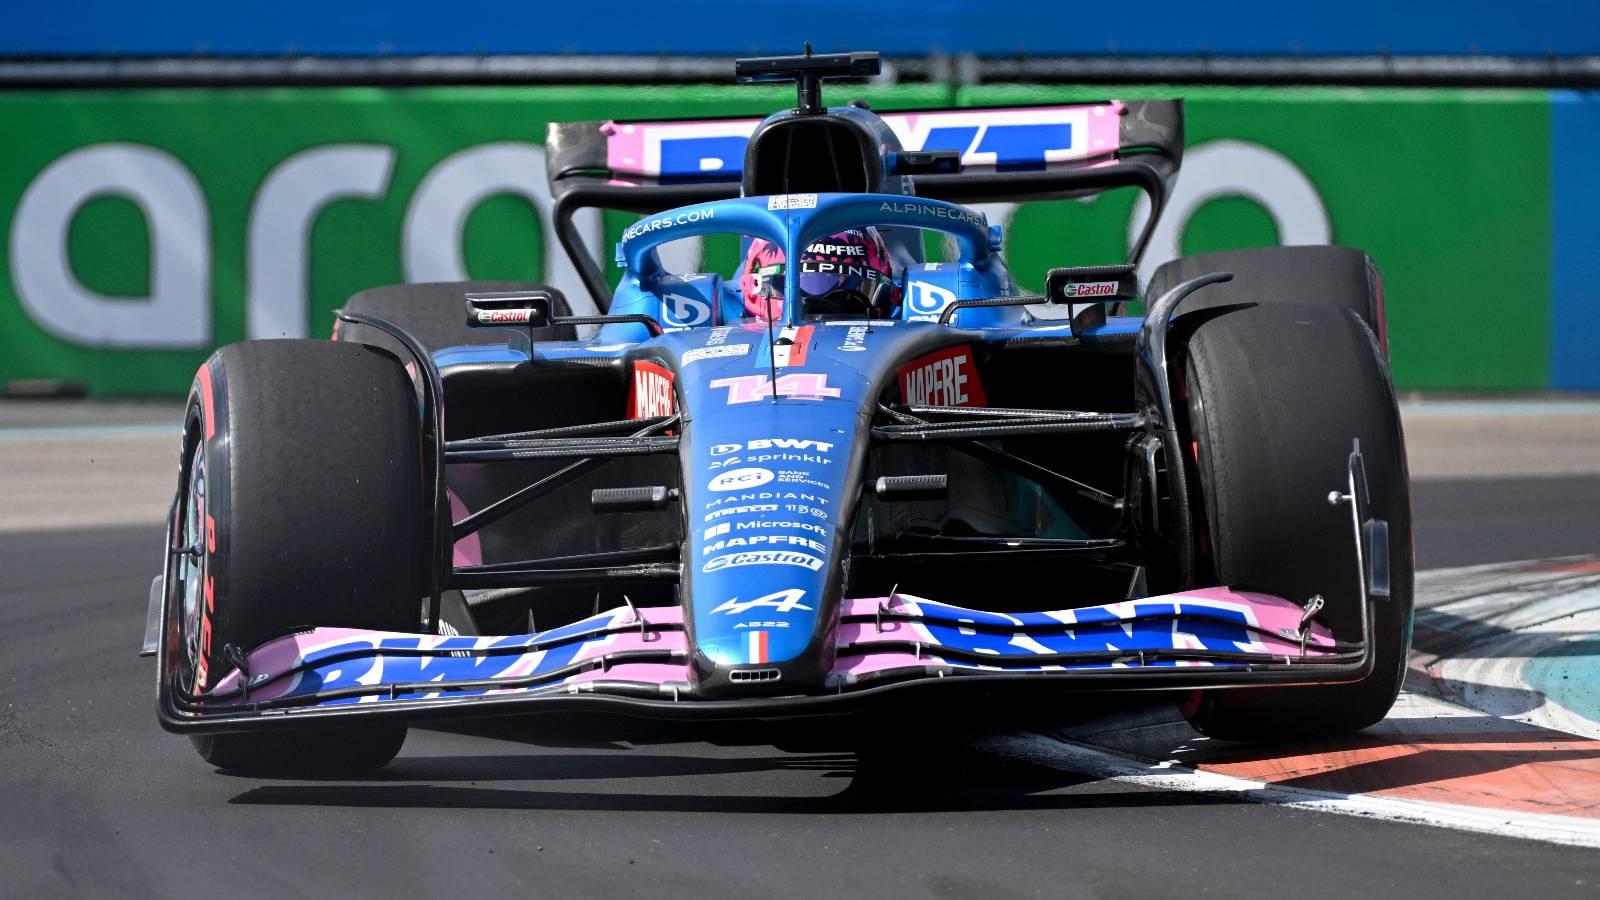 Fernando Alonso, Alpine, on-track in Miami. United States, May 2022.